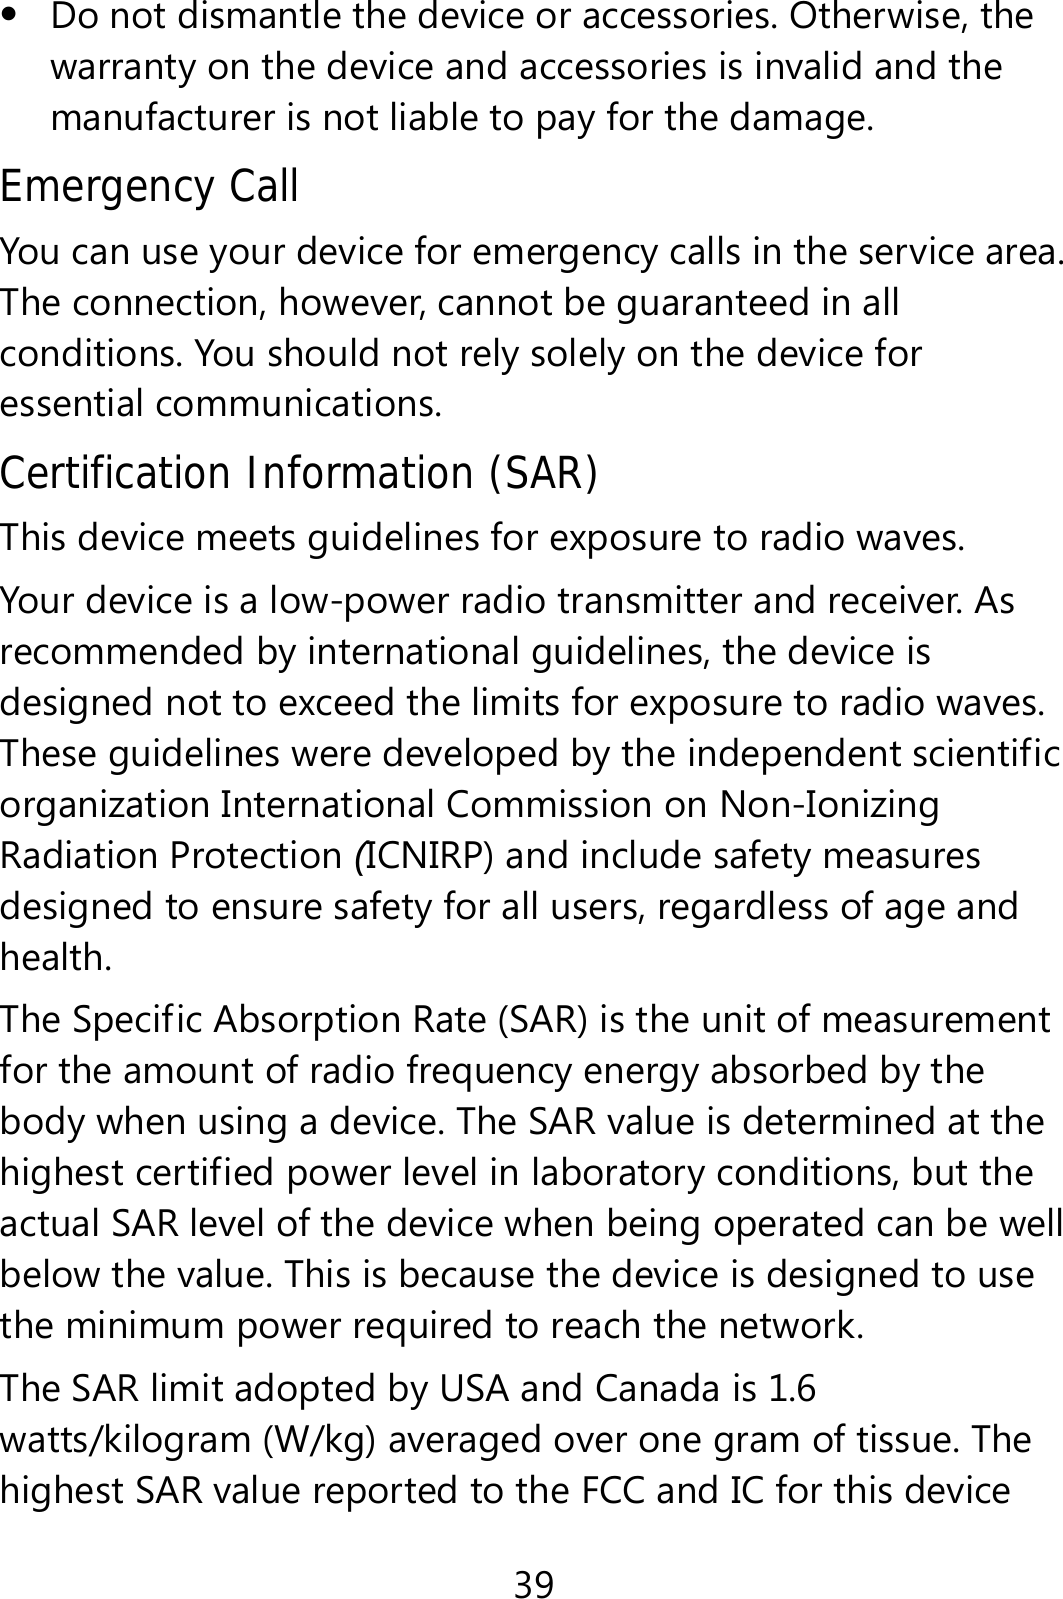 39  Do not dismantle the device or accessories. Otherwise, the warranty on the device and accessories is invalid and the manufacturer is not liable to pay for the damage. Emergency Call You can use your device for emergency calls in the service area. The connection, however, cannot be guaranteed in all conditions. You should not rely solely on the device for essential communications. Certification Information (SAR) This device meets guidelines for exposure to radio waves. Your device is a low-power radio transmitter and receiver. As recommended by international guidelines, the device is designed not to exceed the limits for exposure to radio waves. These guidelines were developed by the independent scientific organization International Commission on Non-Ionizing Radiation Protection (ICNIRP) and include safety measures designed to ensure safety for all users, regardless of age and health.  The Specific Absorption Rate (SAR) is the unit of measurement for the amount of radio frequency energy absorbed by the body when using a device. The SAR value is determined at the highest certified power level in laboratory conditions, but the actual SAR level of the device when being operated can be well below the value. This is because the device is designed to use the minimum power required to reach the network. The SAR limit adopted by USA and Canada is 1.6 watts/kilogram (W/kg) averaged over one gram of tissue. The highest SAR value reported to the FCC and IC for this device 